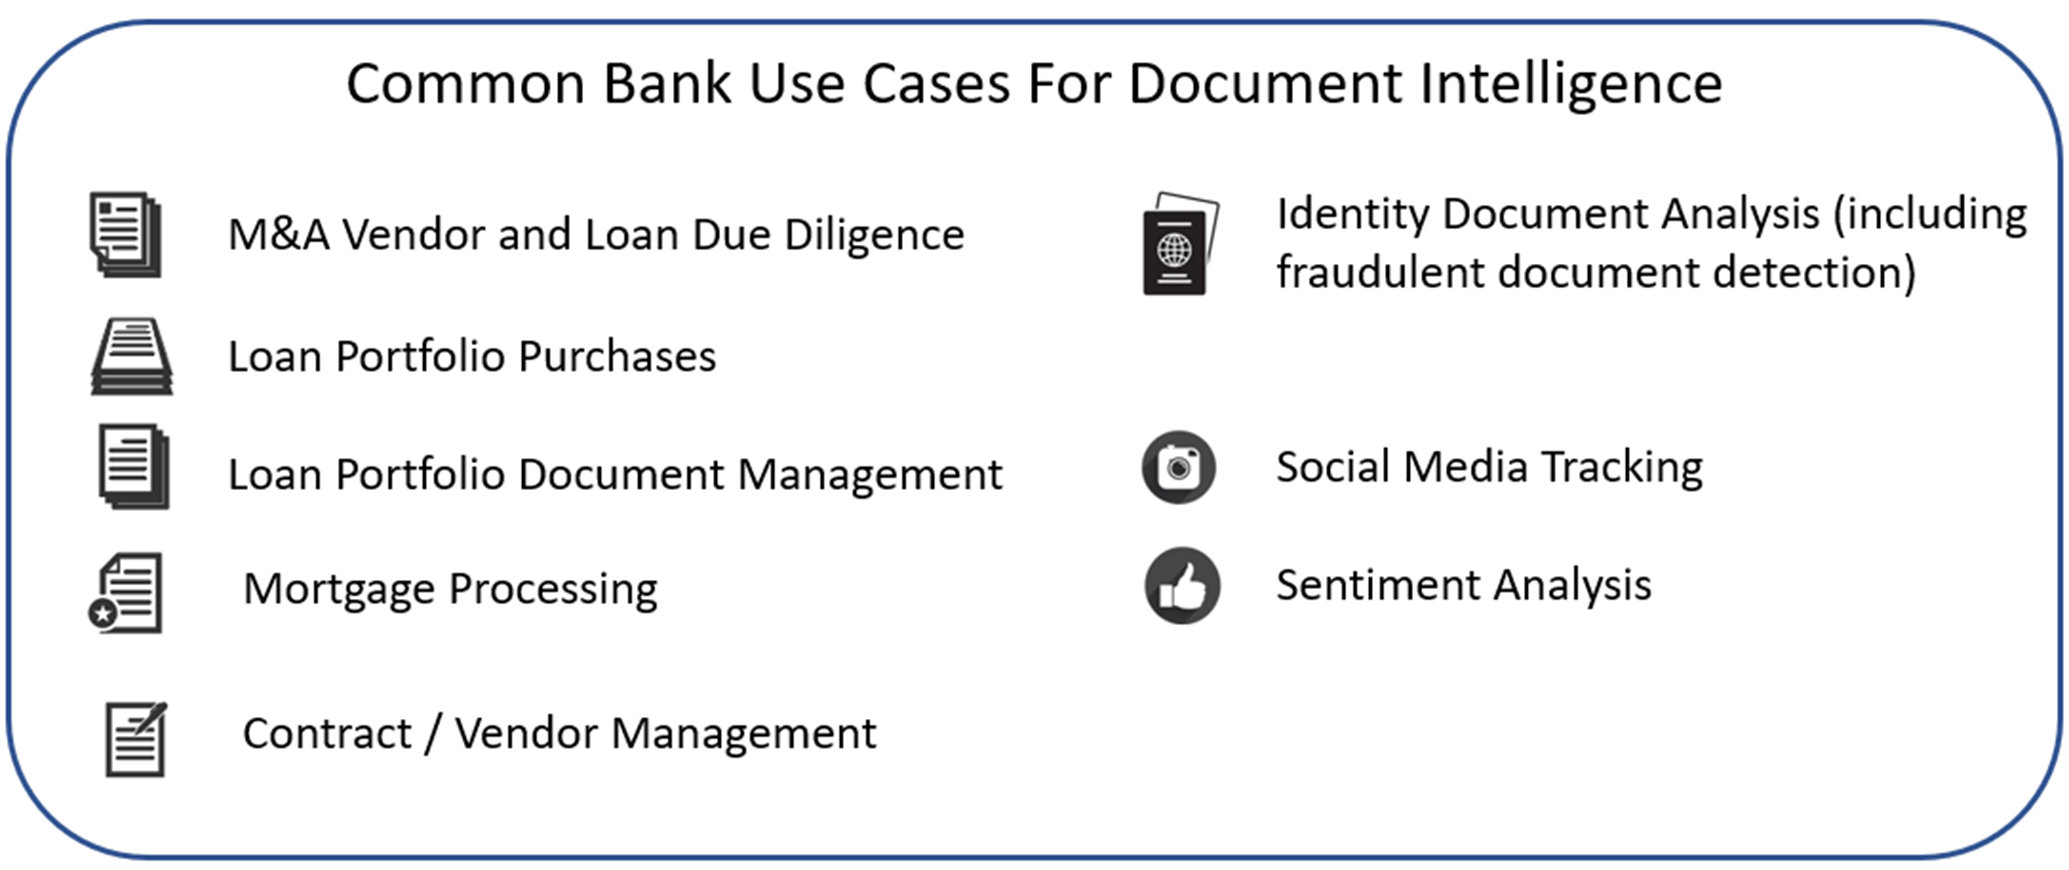 Common Bank Use Cases For Document Intelligence